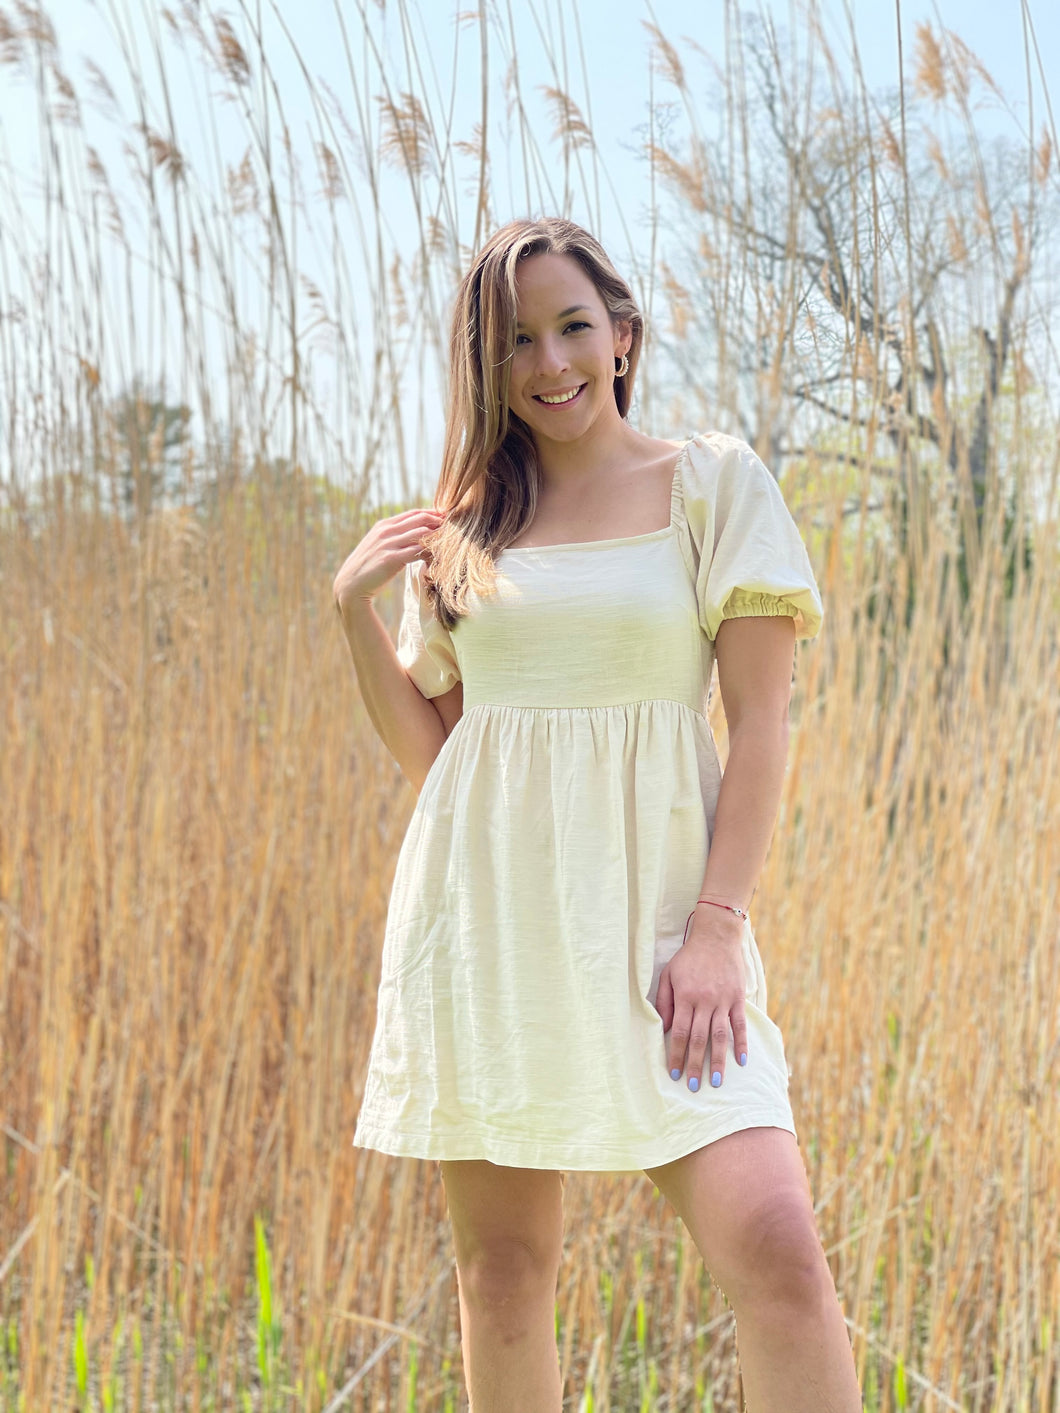 Puff Sleeve Mini dress with pockets. Feels and looks like linen in person, such a beautiful and easy dress to wear! The babydoll silhouette is flattering on all body types!